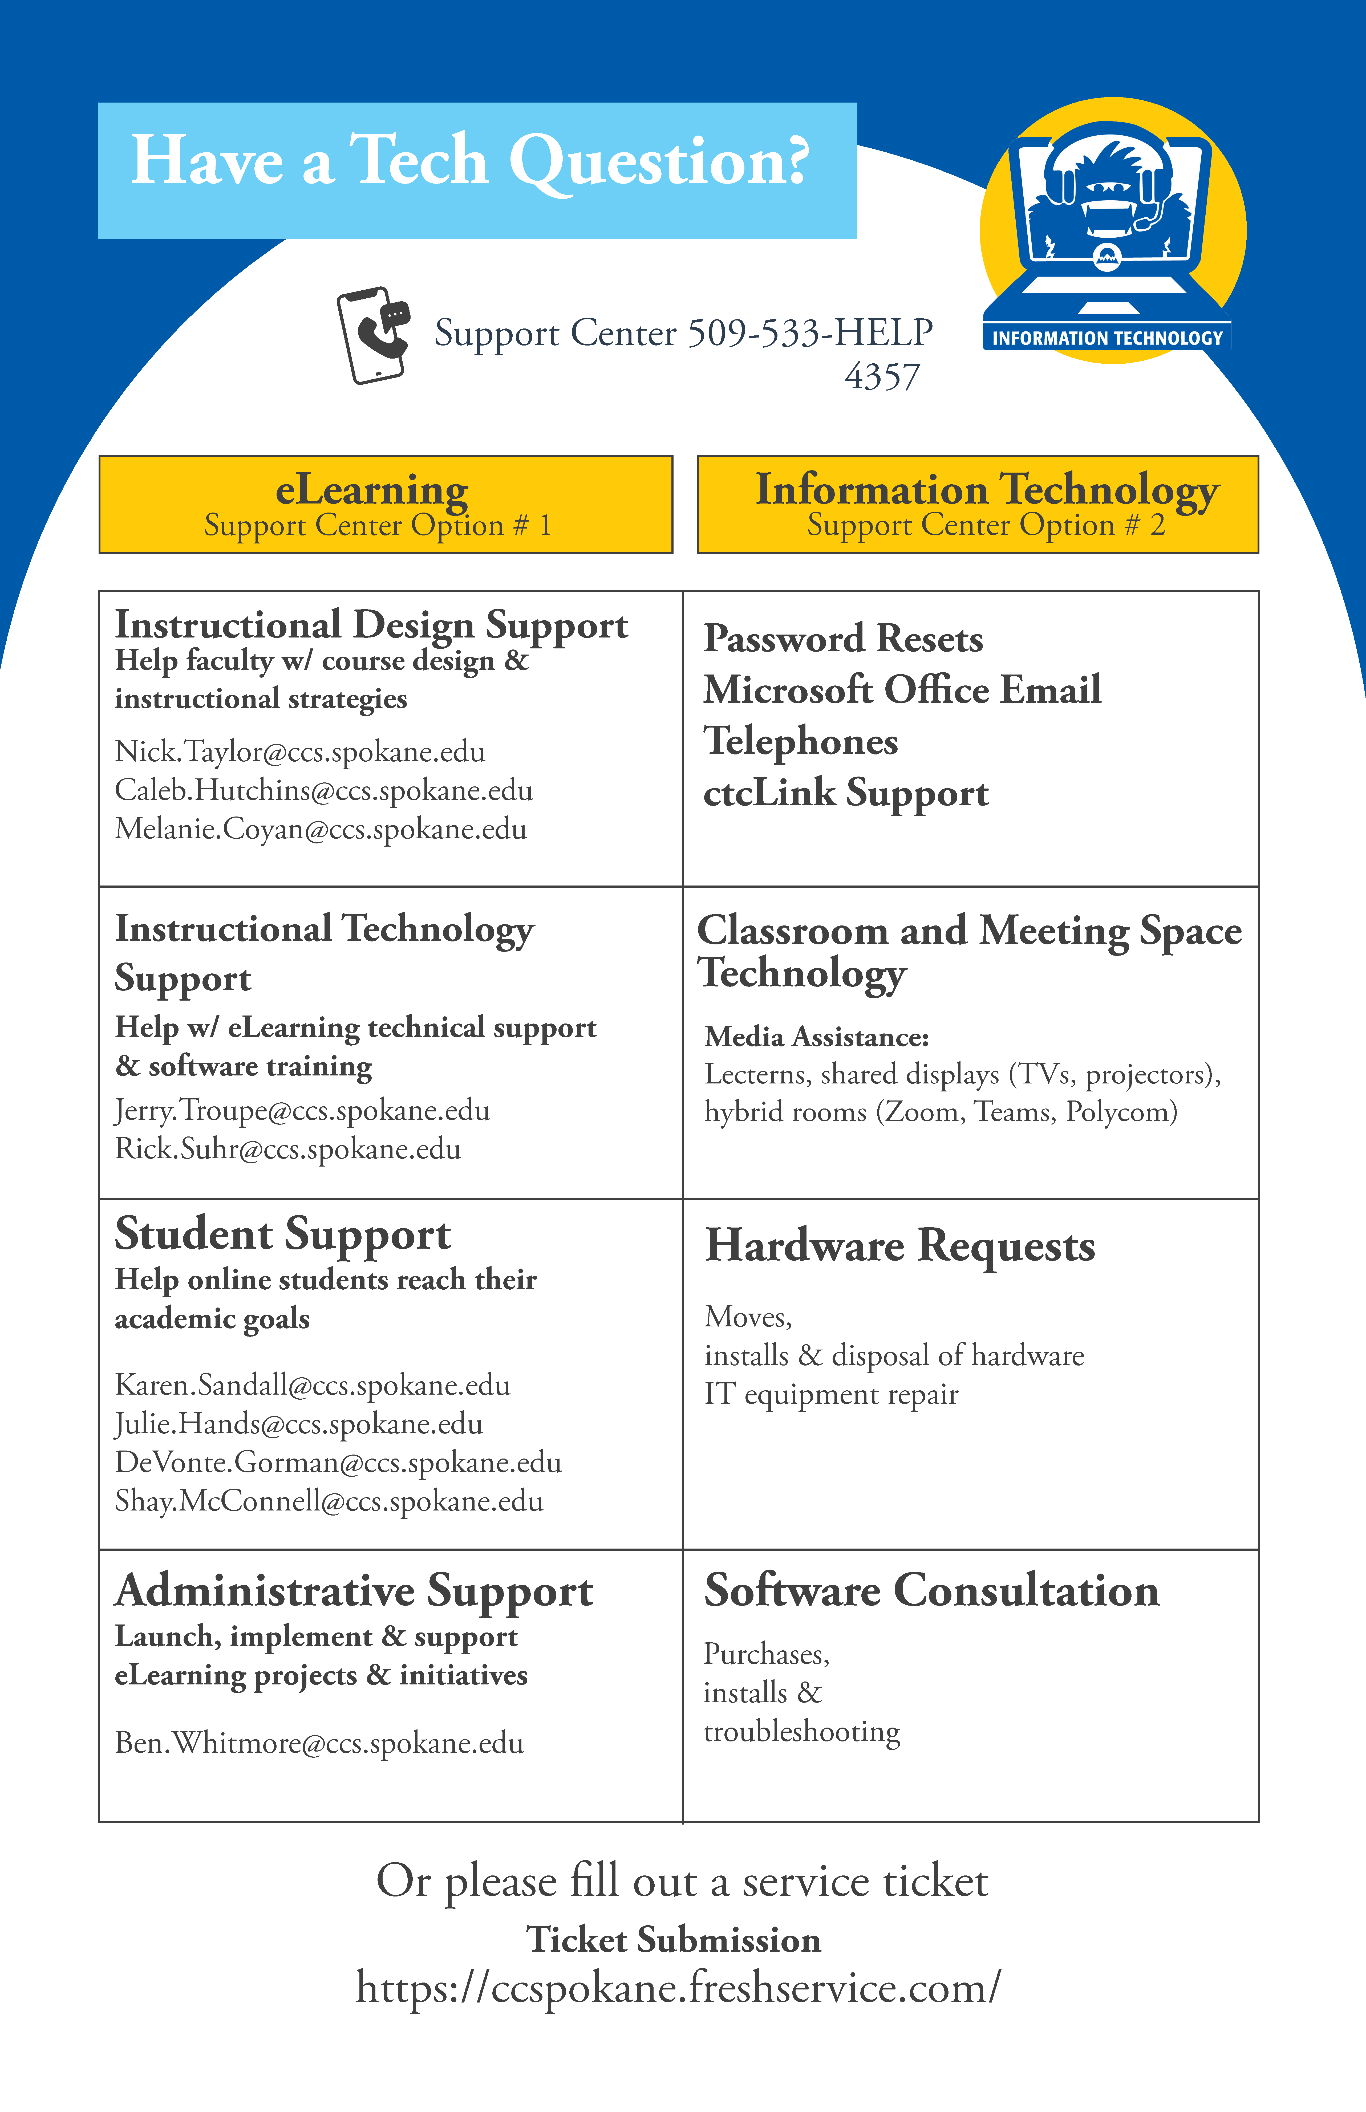 Flyer showing a chart differentiating support options provided by Spokane Colleges Information Technology and eLearning.